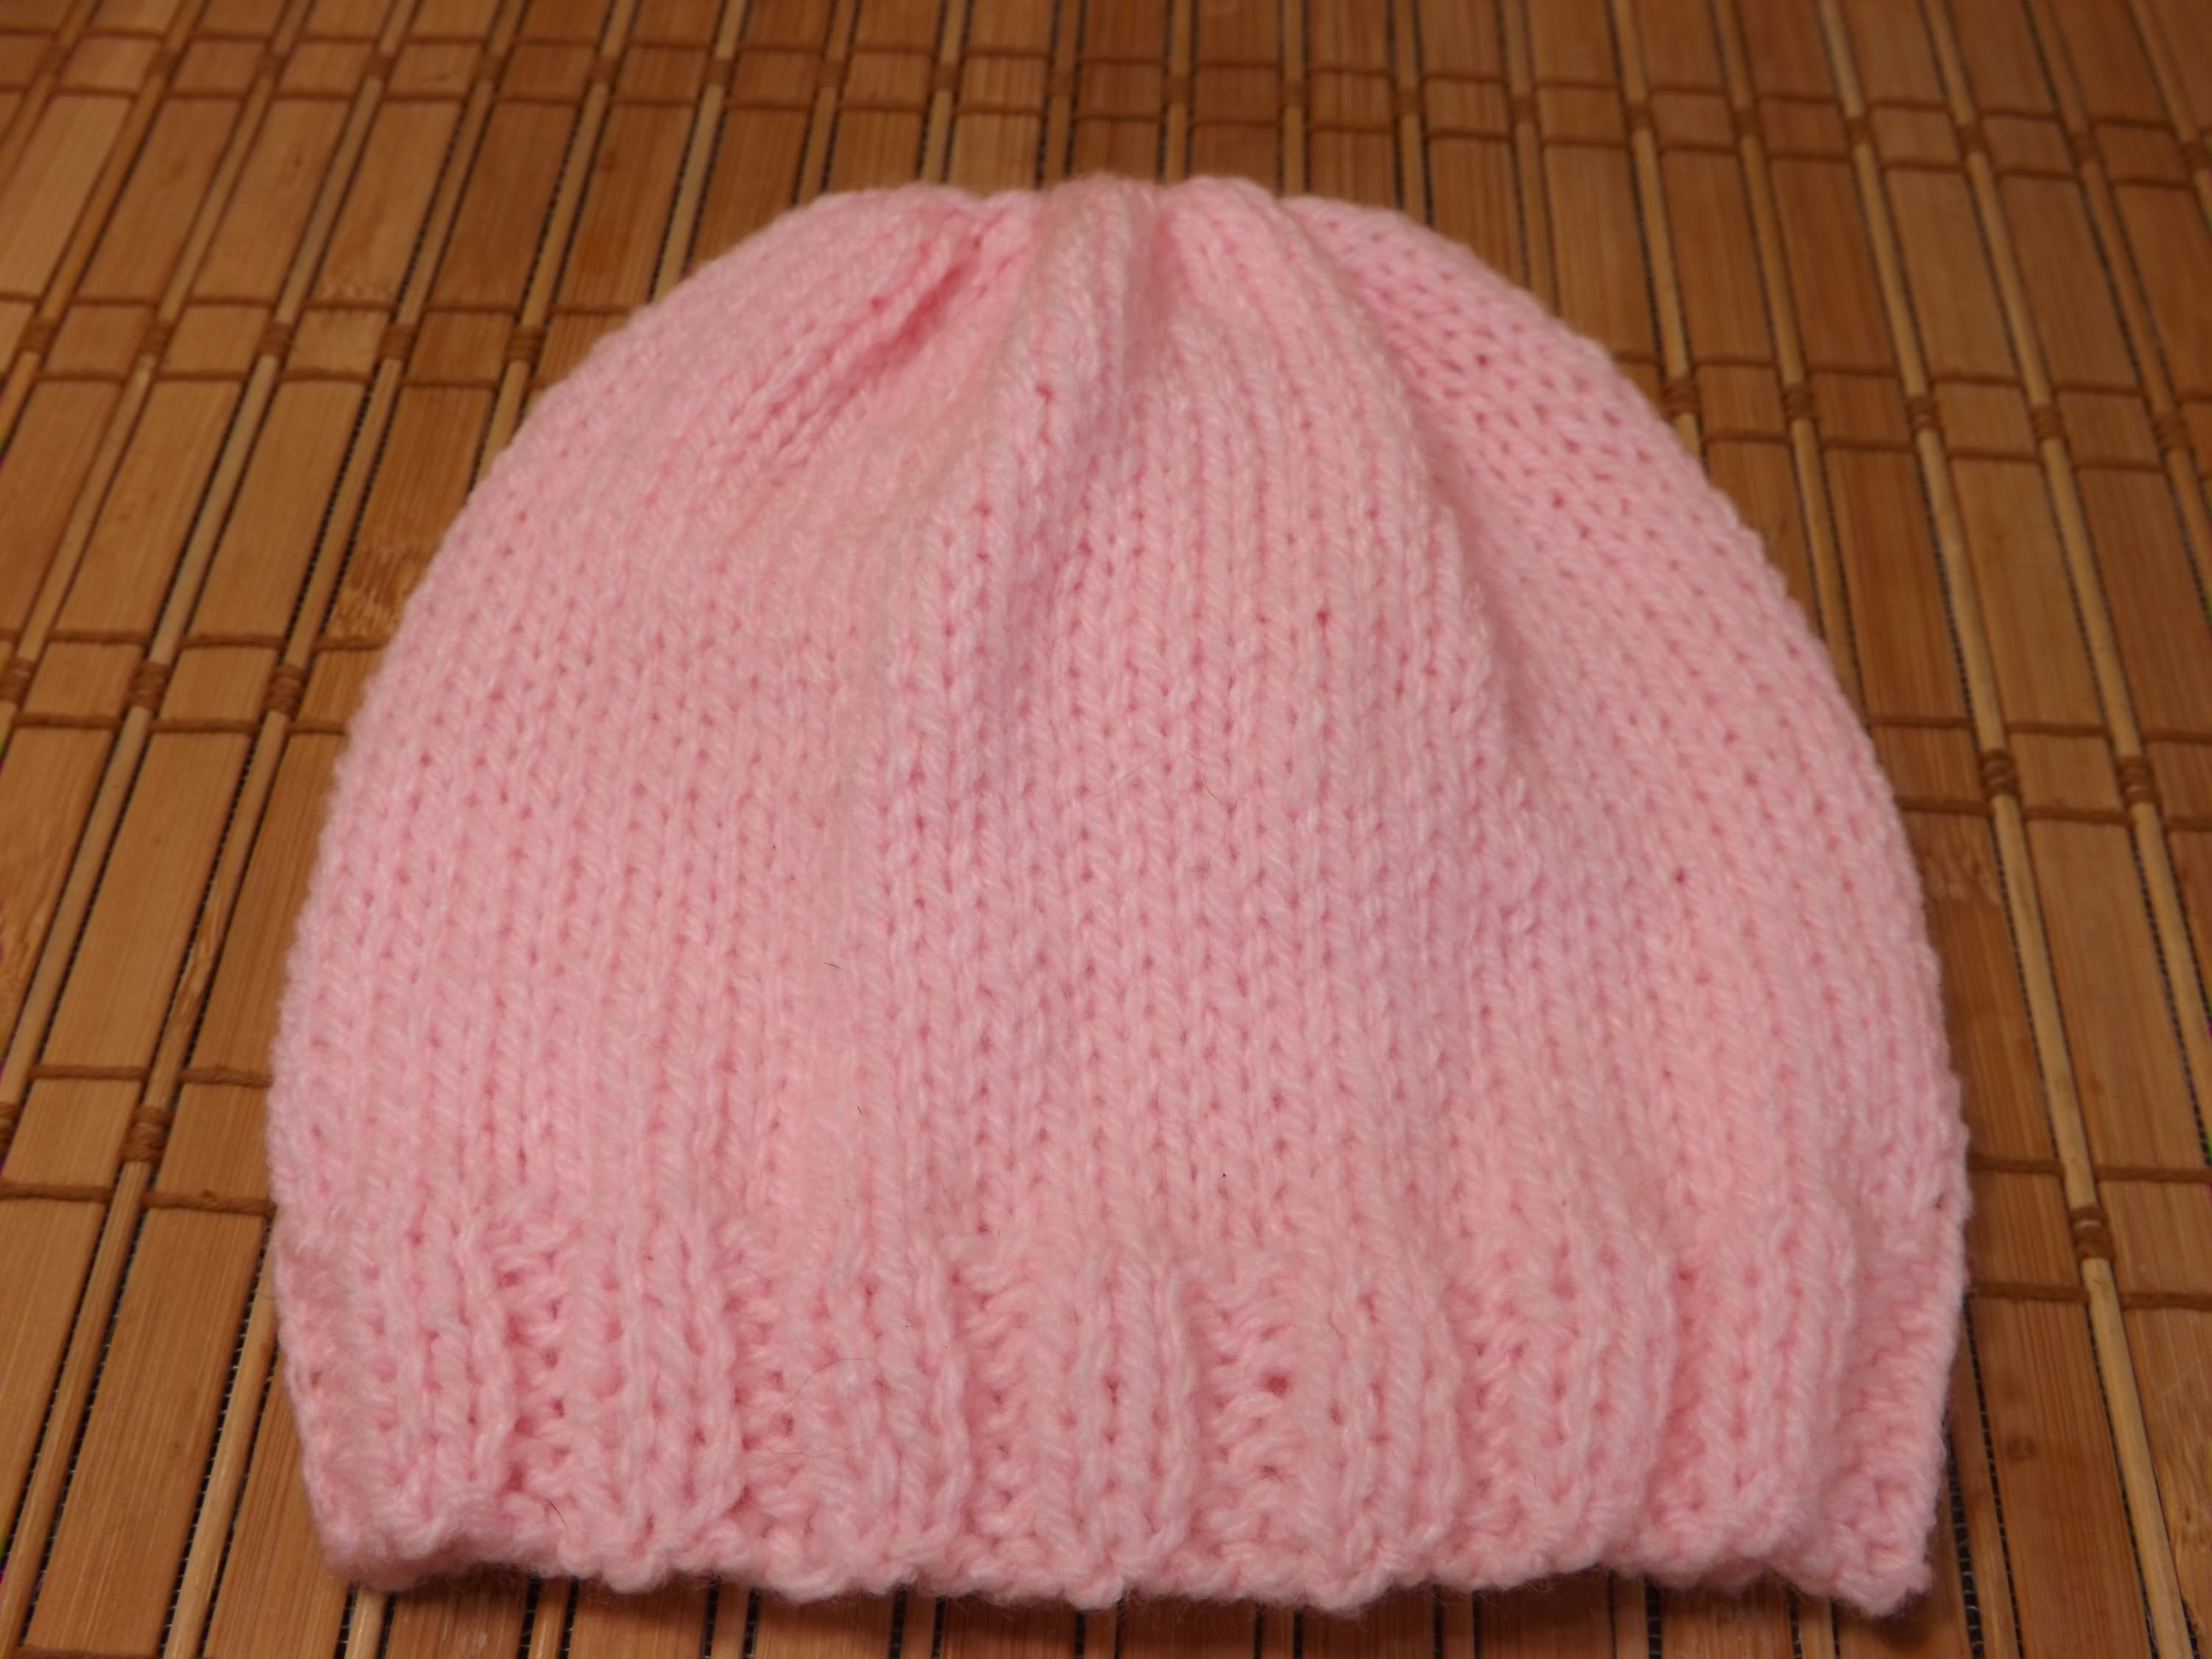 Baby Hat Patterns To Knit Different Ba Hat Knitting Patterns Crochet And Knitting Patterns